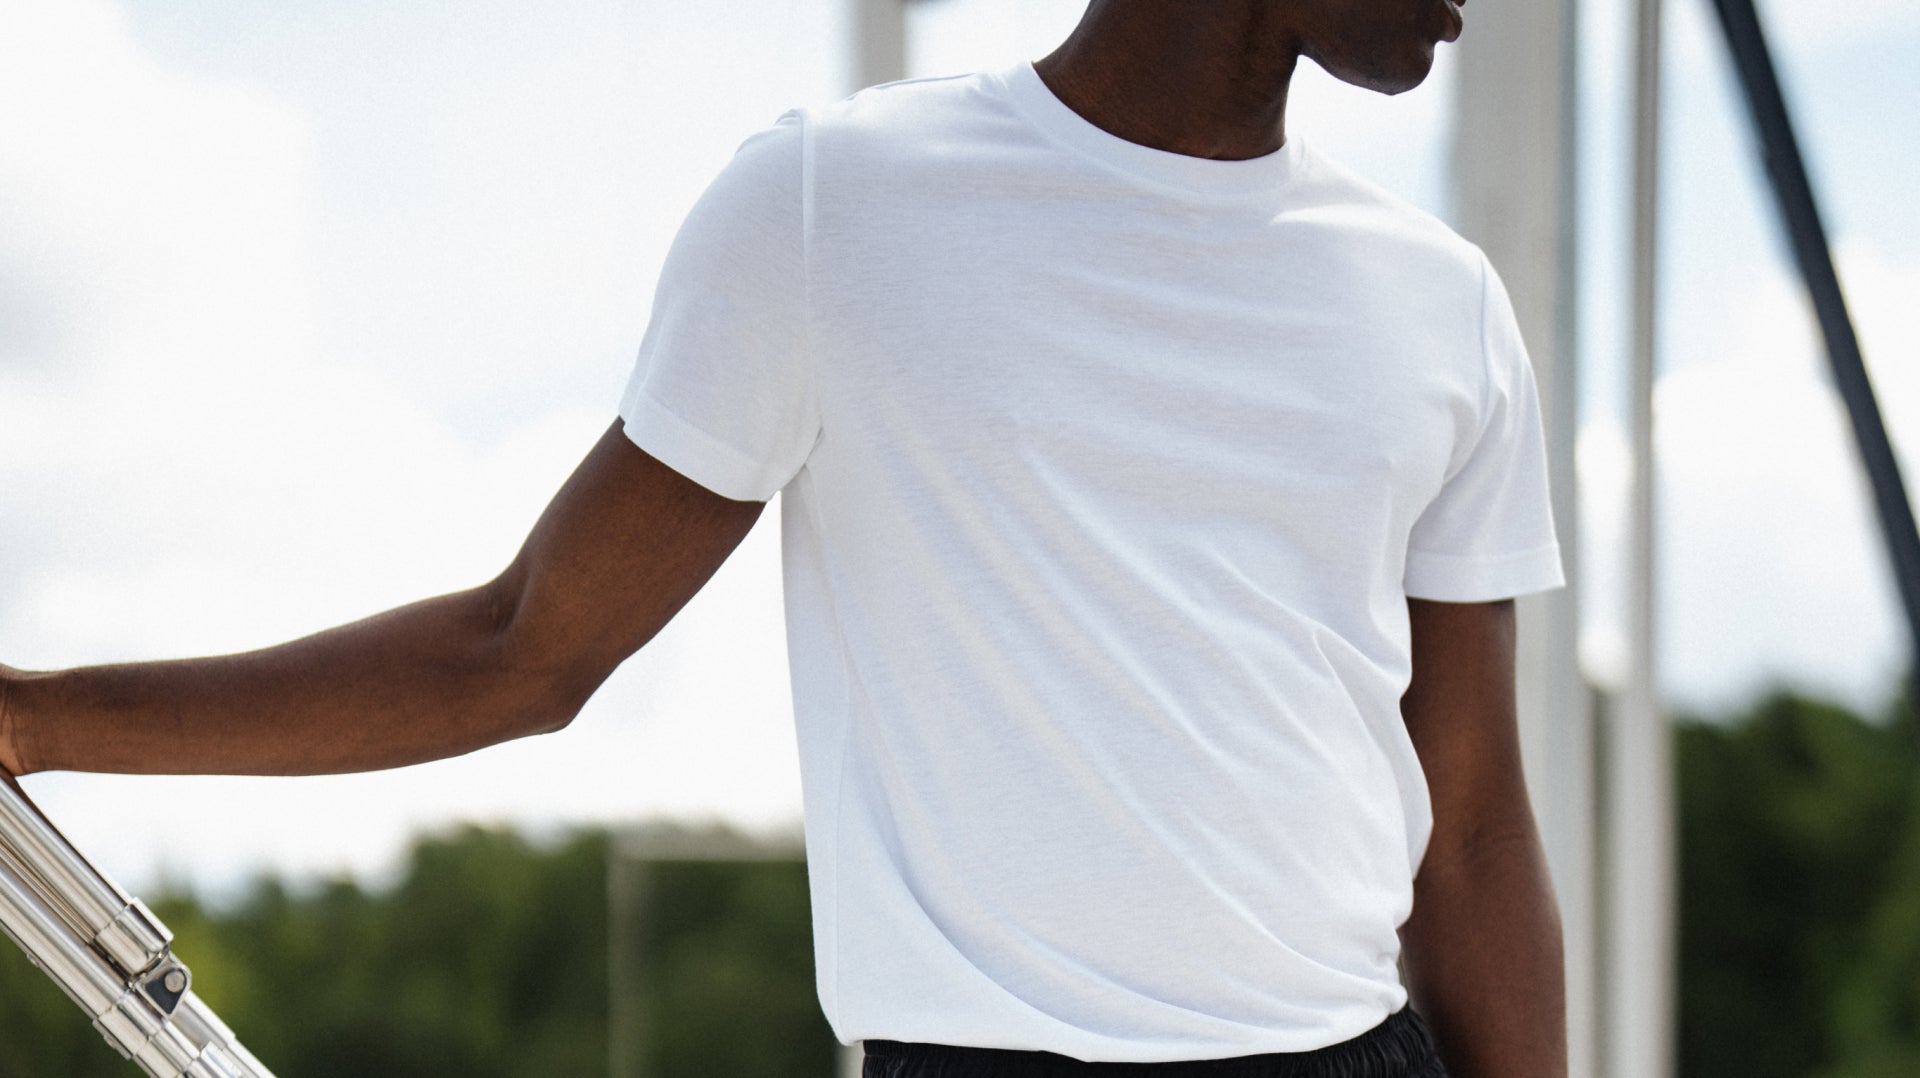 The perfect white t-shirt